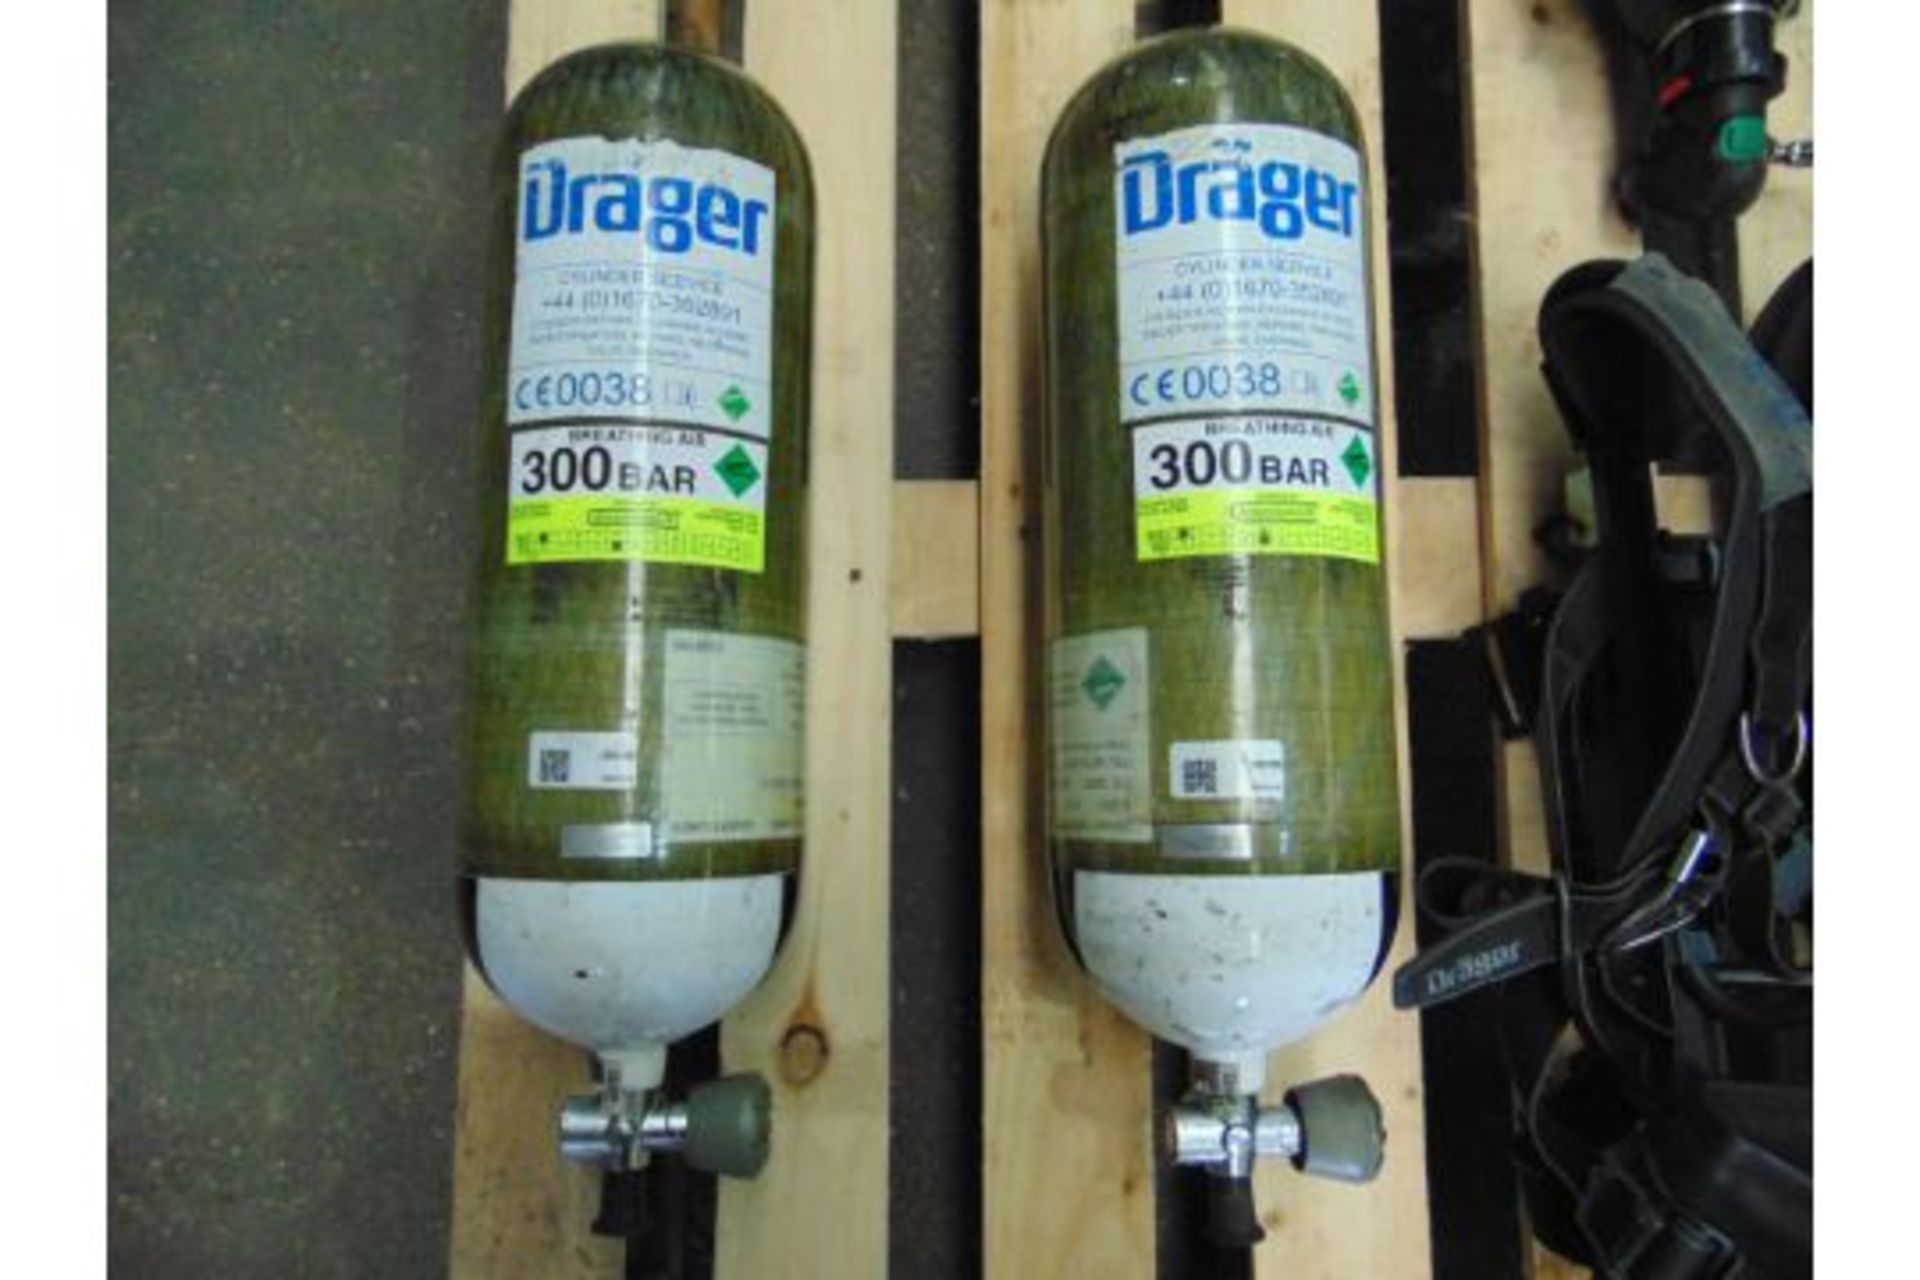 Drager PSS 7000 Self Contained Breathing Apparatus w/ 2 x Drager 300 Bar Air Cylinders - Bild 2 aus 18